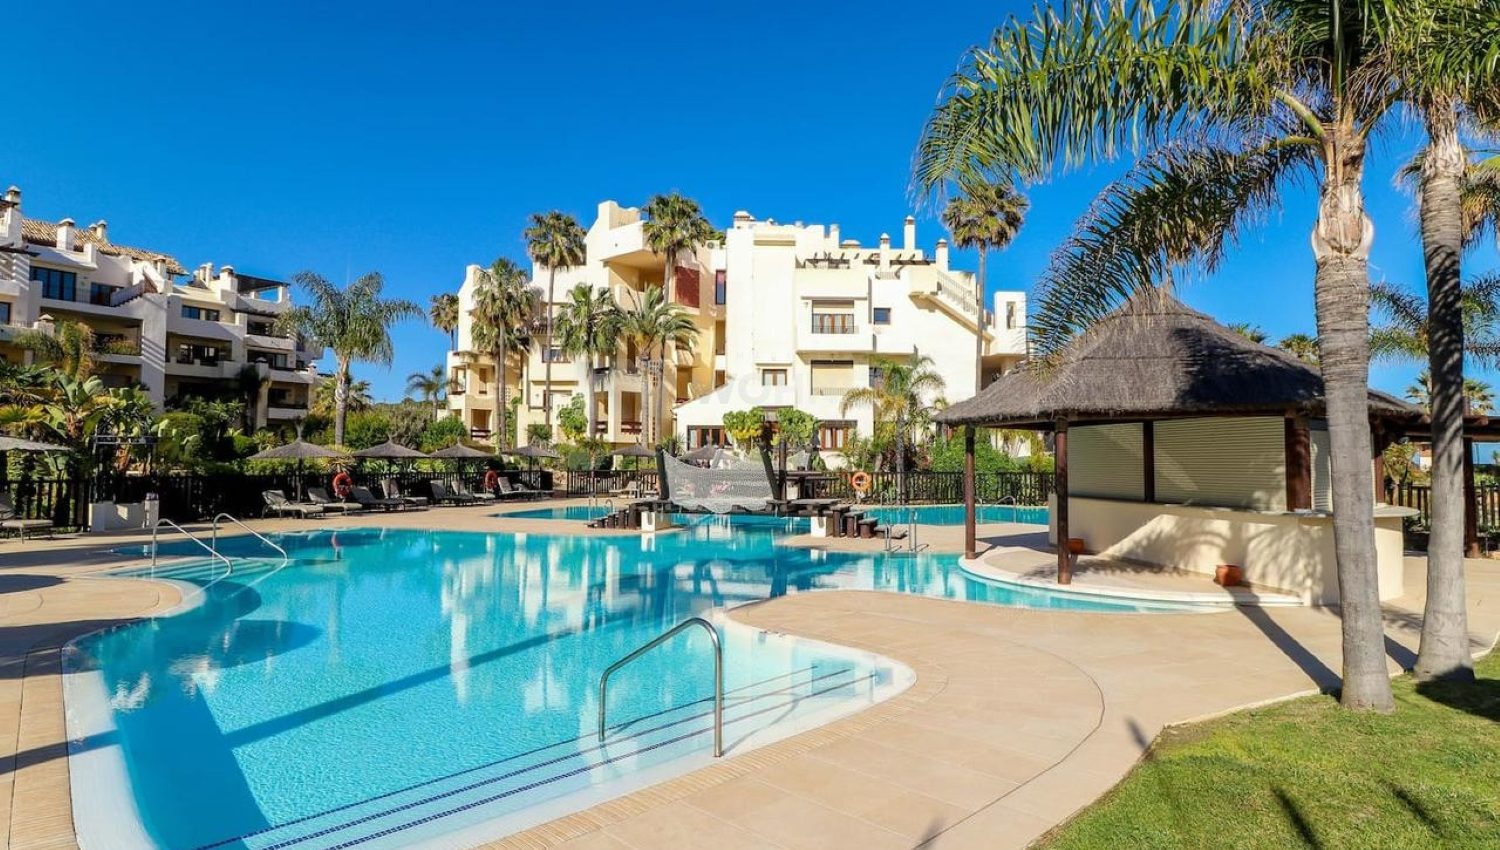 Completely renovated, high quality apartment with direct access to the beach